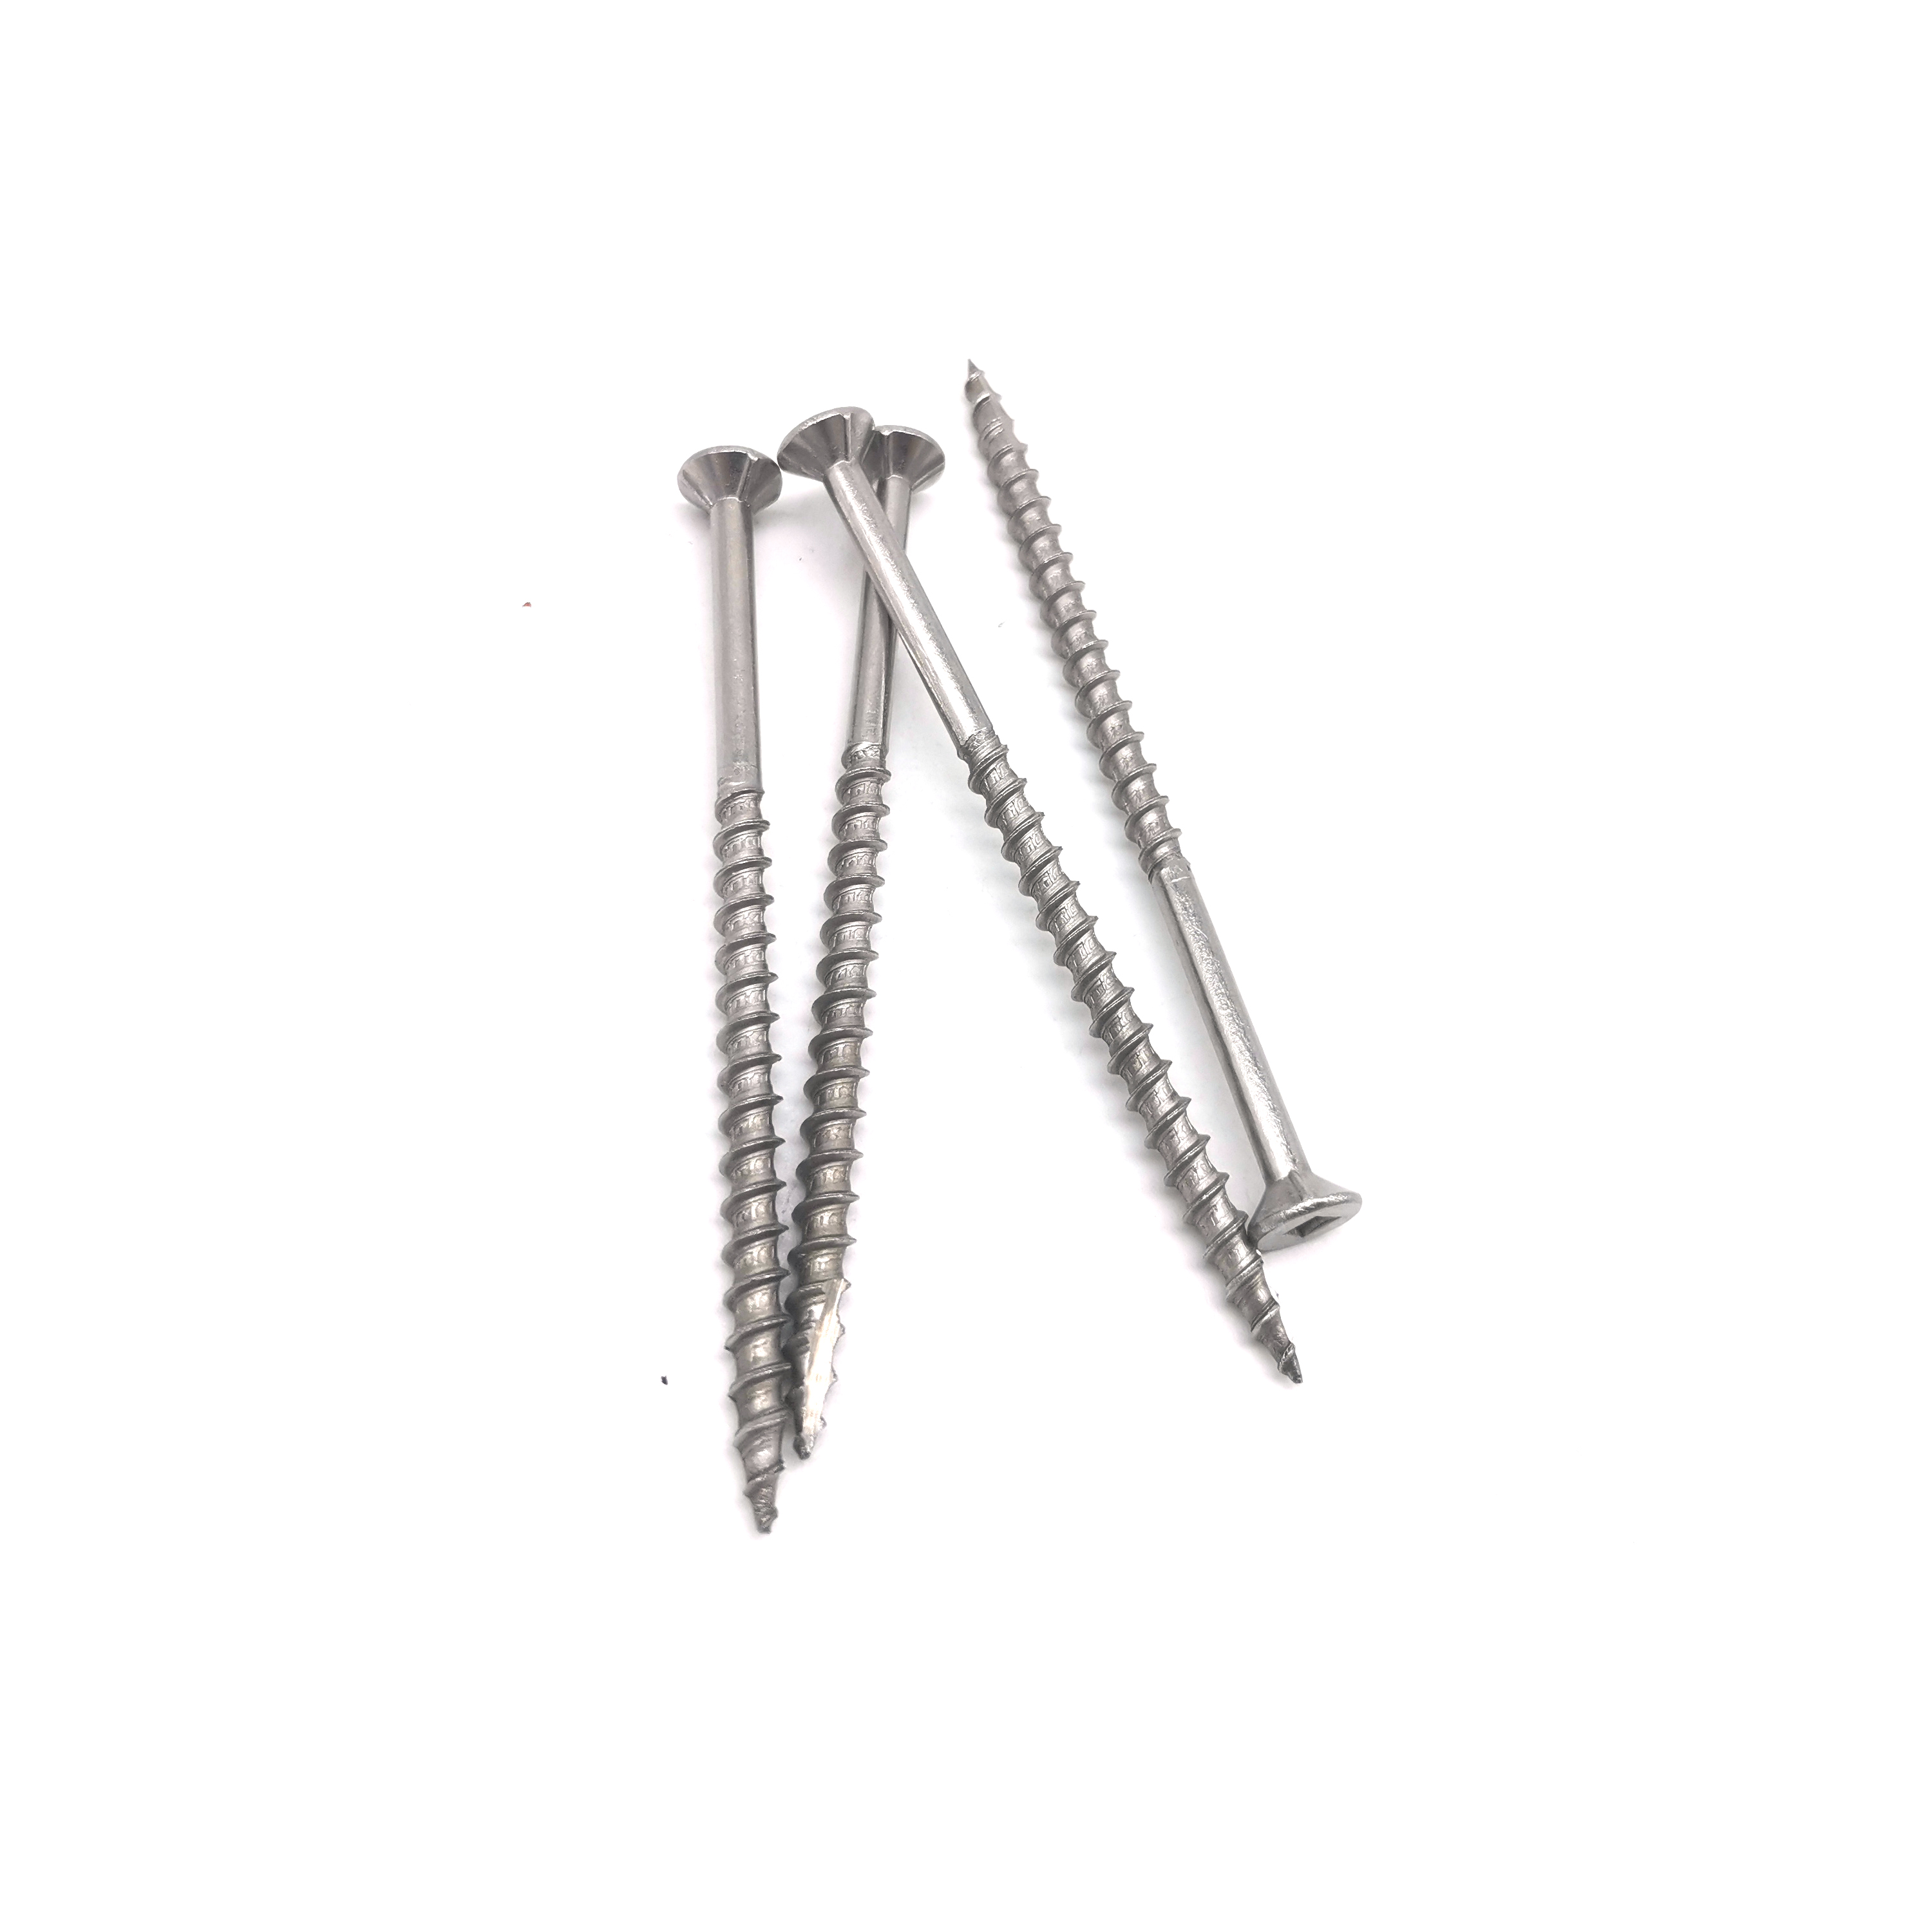 China Factory 410 304 316 Stainless Steel Head Self Tapping Bolt Screw 